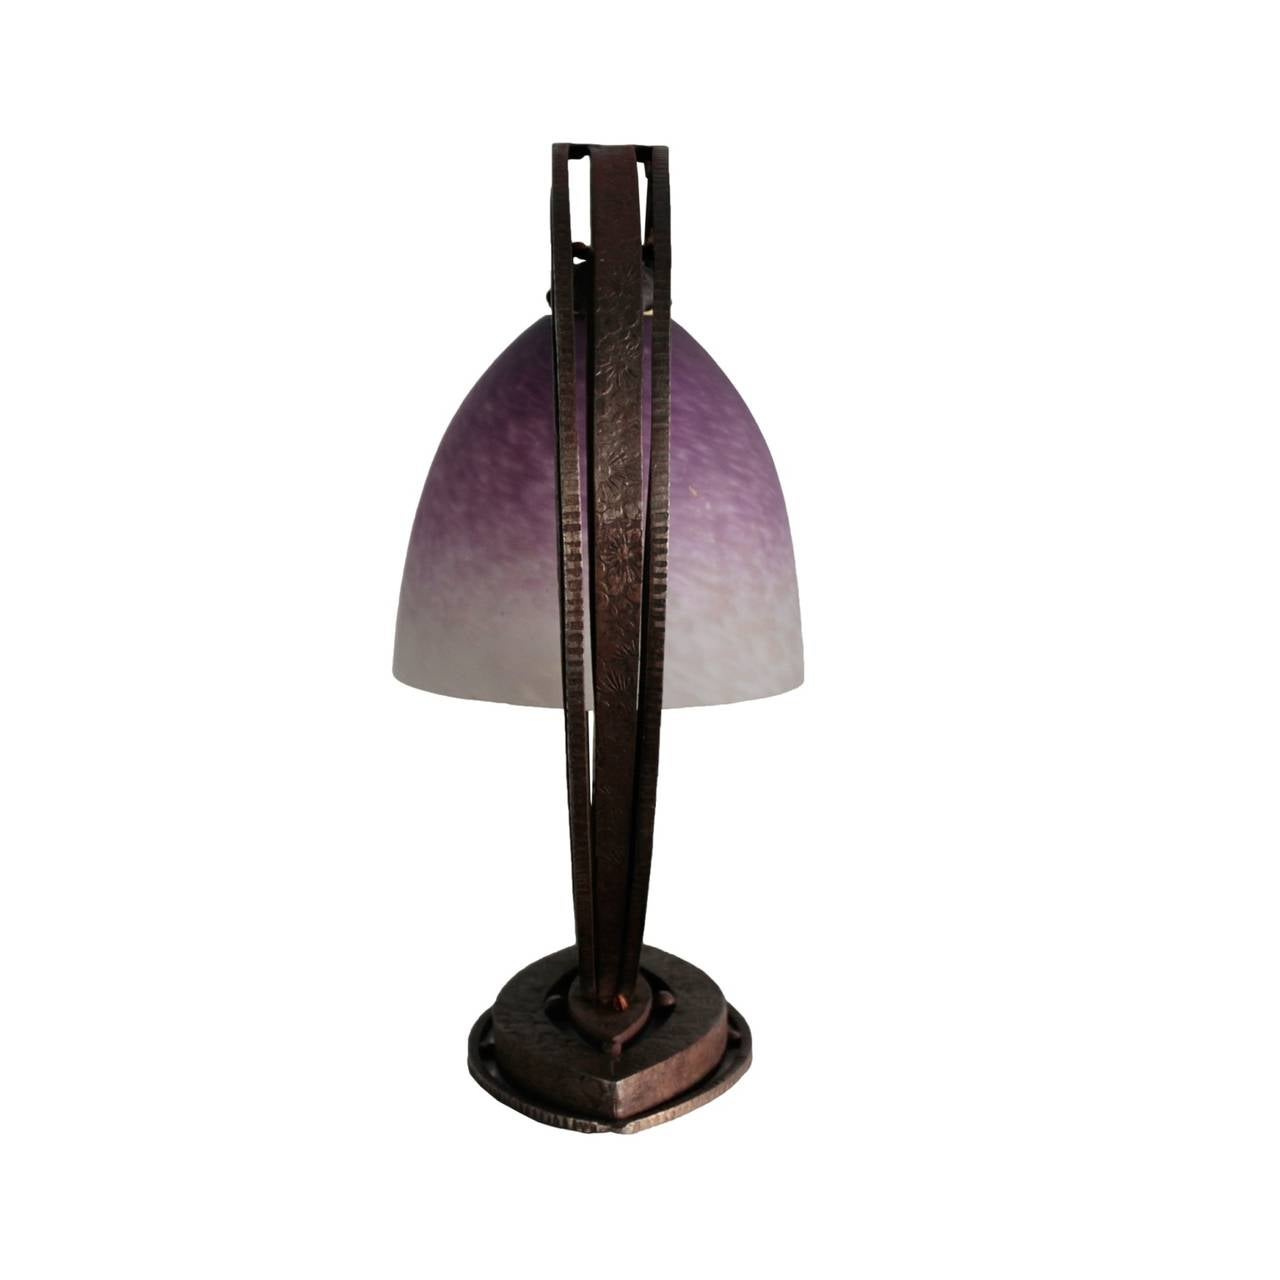 Early 20th Century French Art Deco Period Fer Forge and Glass Table Lamp